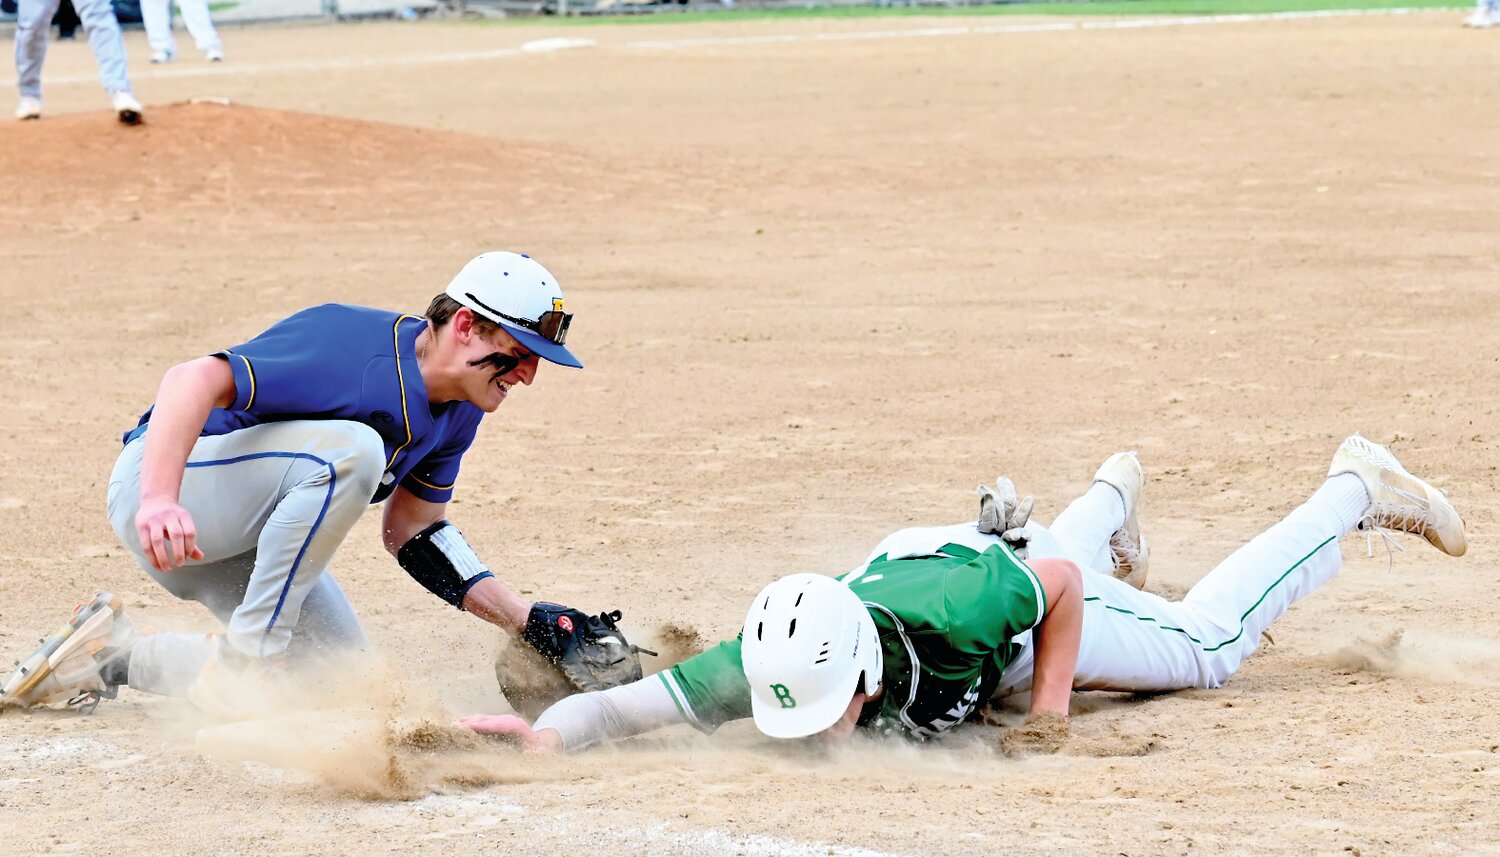 Fatima first baseman Jacob Schulte applies a late tag on a pickoff attempt during Thursday’s 3-0 win over Blair Oaks.